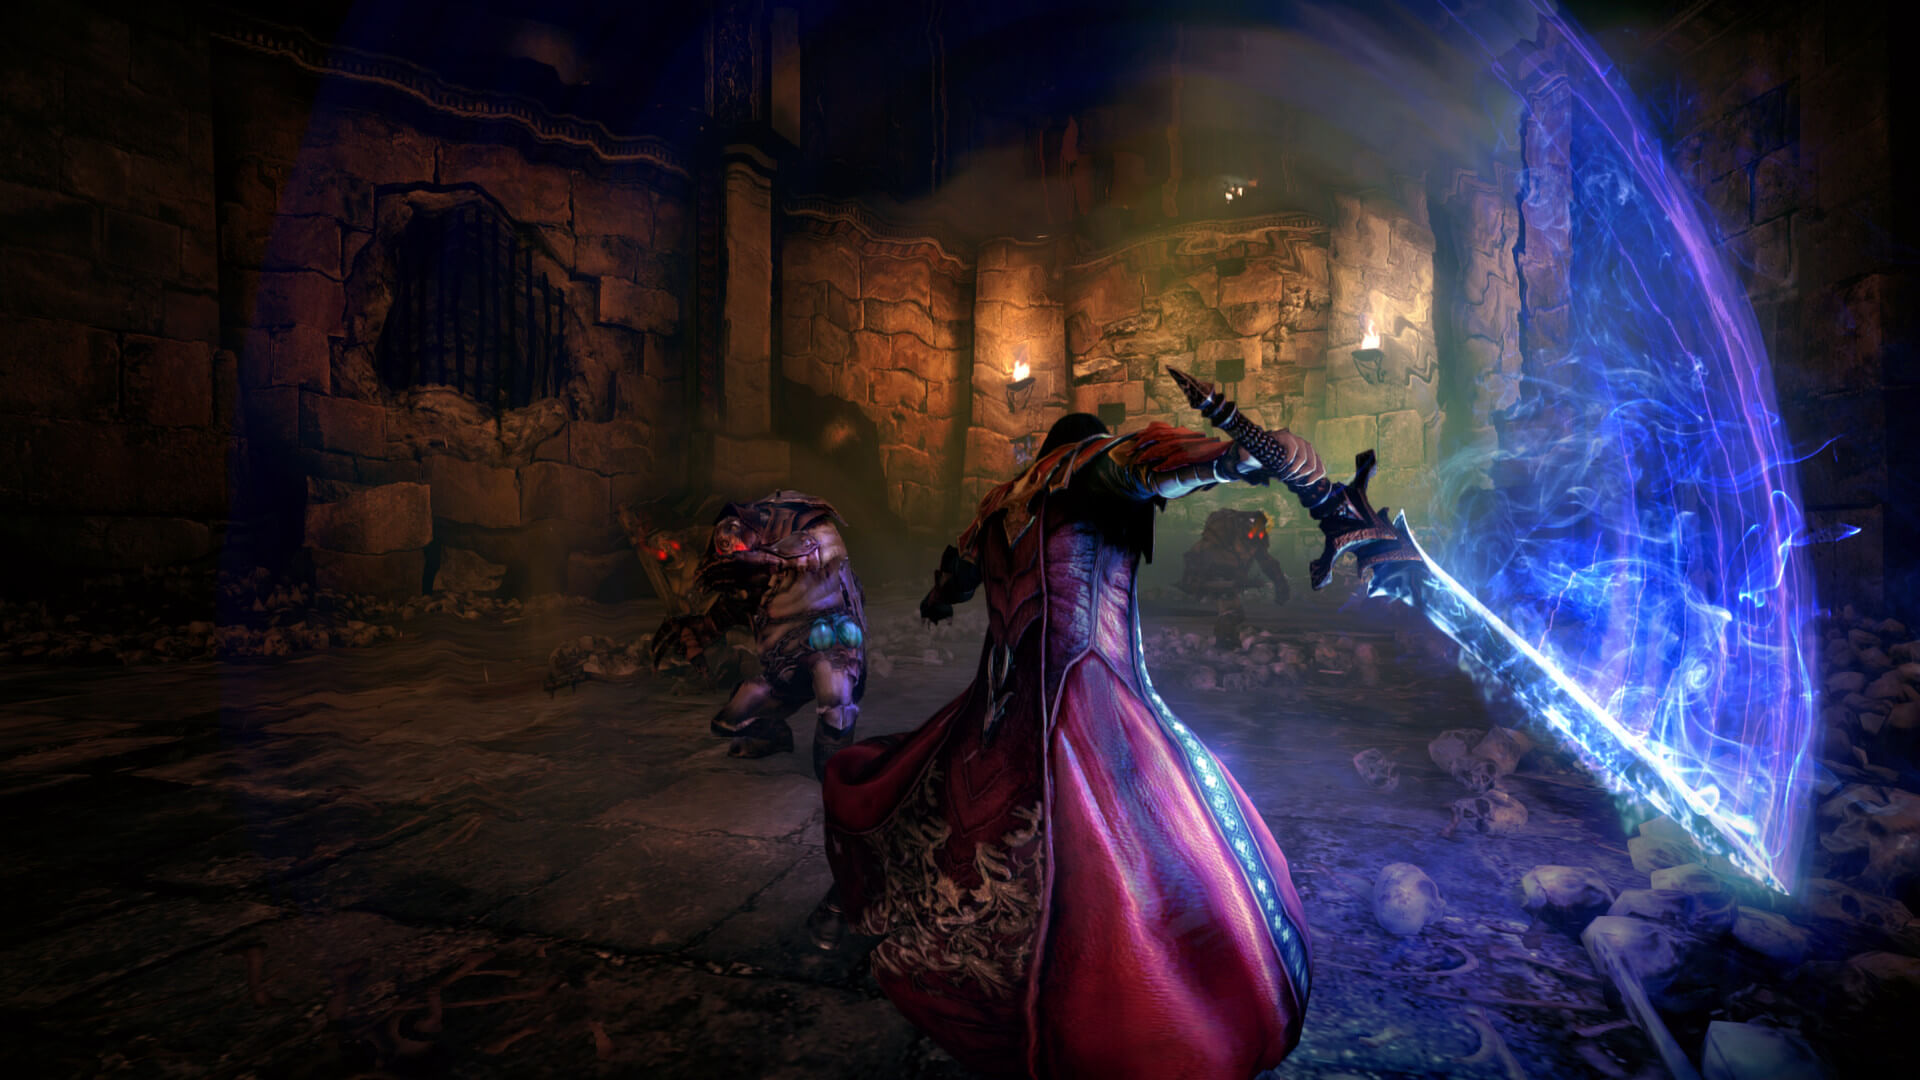 Castlevania: Lords of Shadow 2, the last Castlevania game as of April 2022